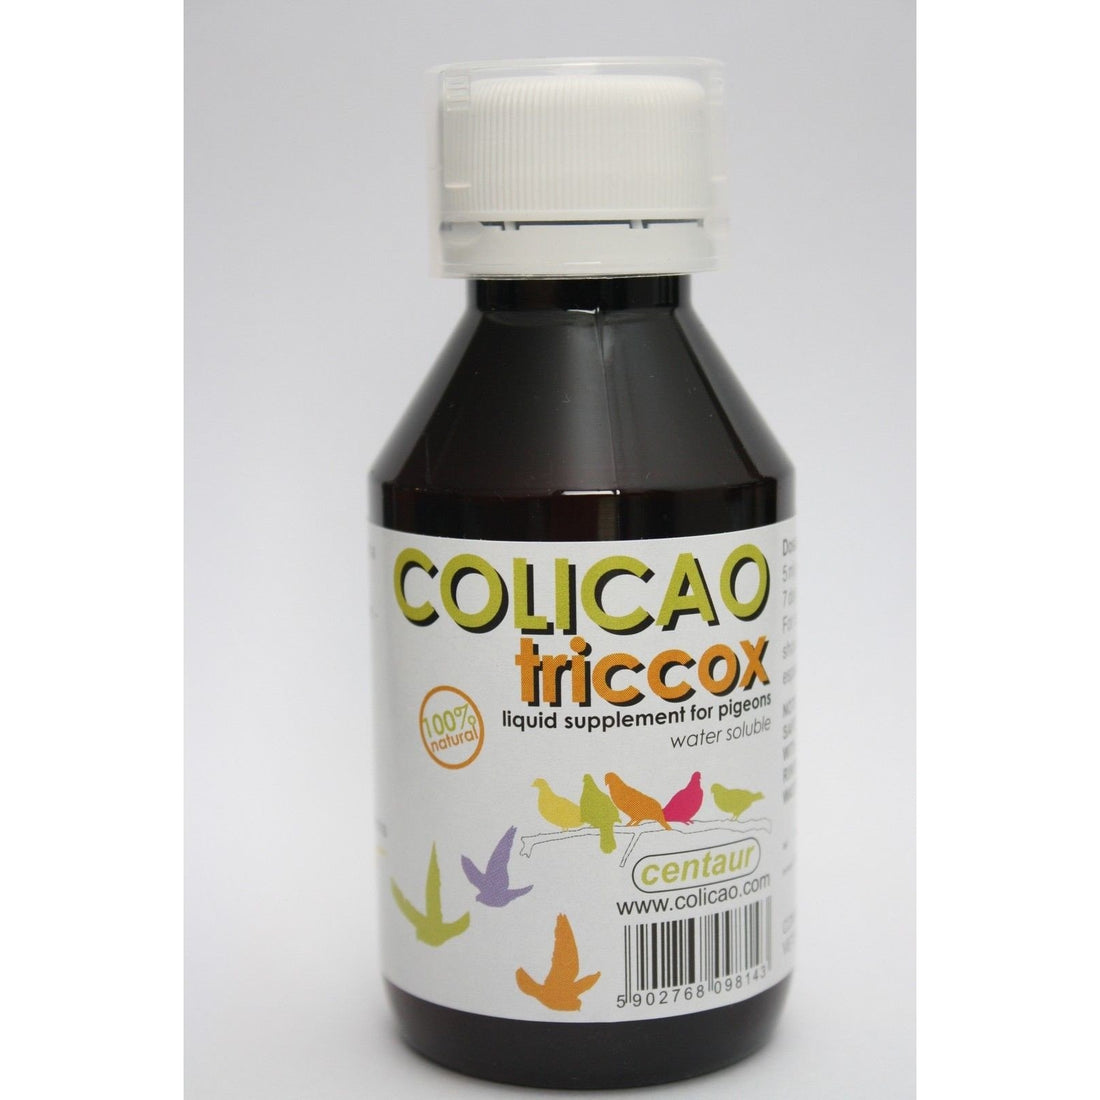 NEW Triccox for intestinal support for racing pigeons